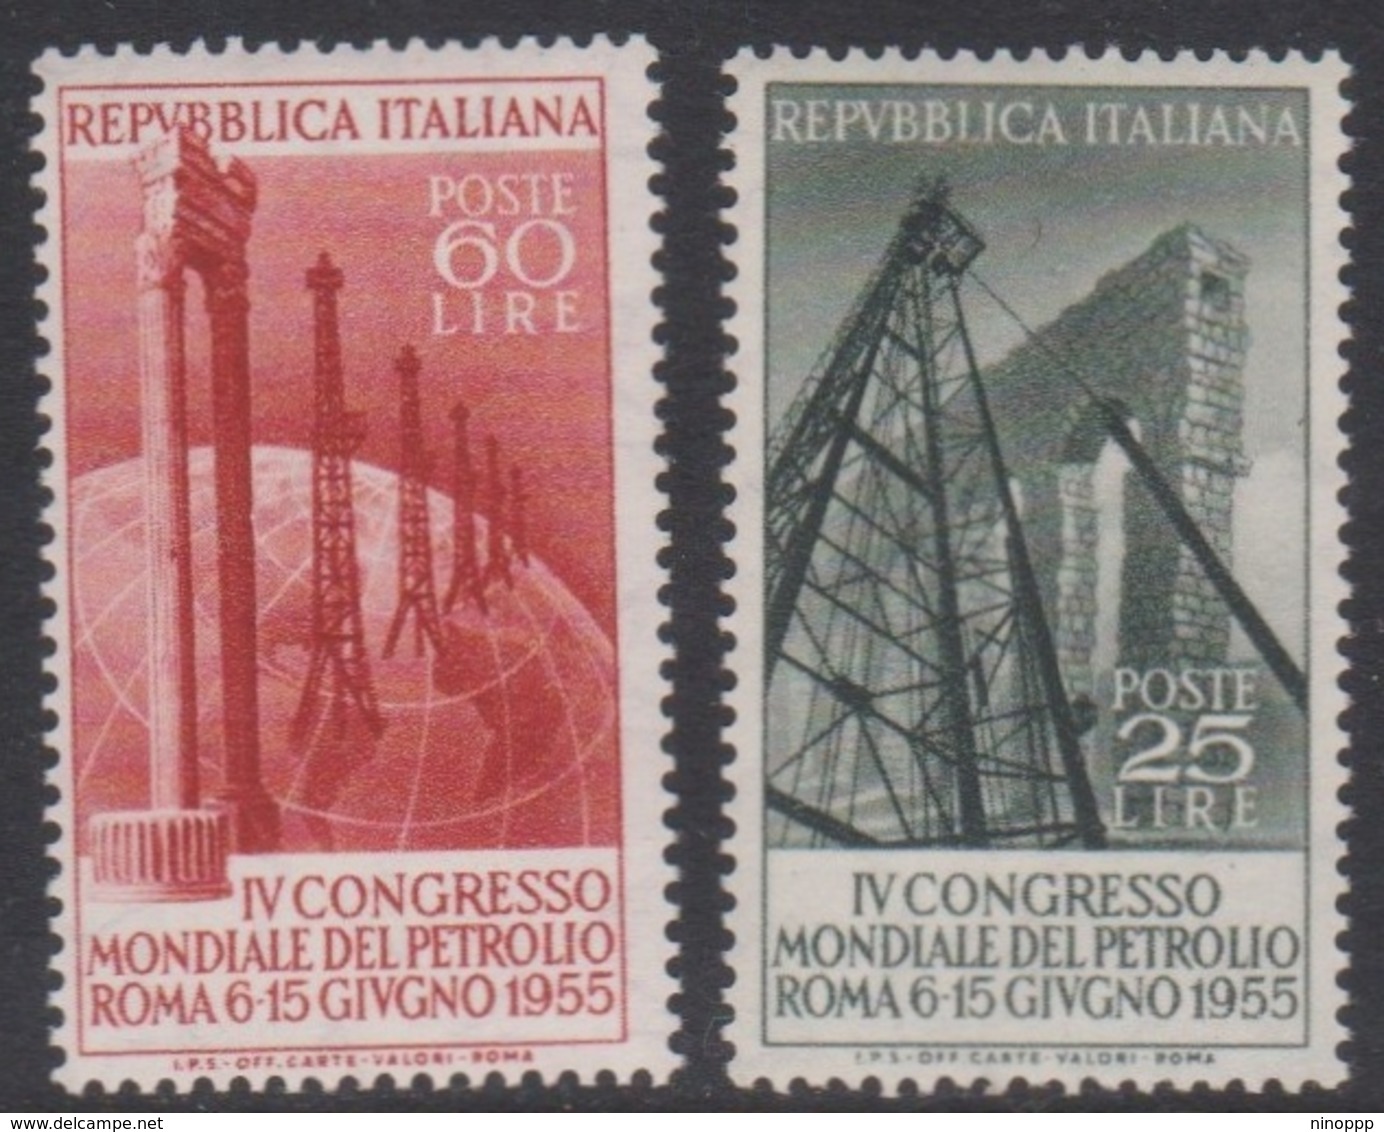 Italy Republic S 779-780 1955 4th World Petroleum Congress, Mint Never Hinged - 1946-60: Mint/hinged